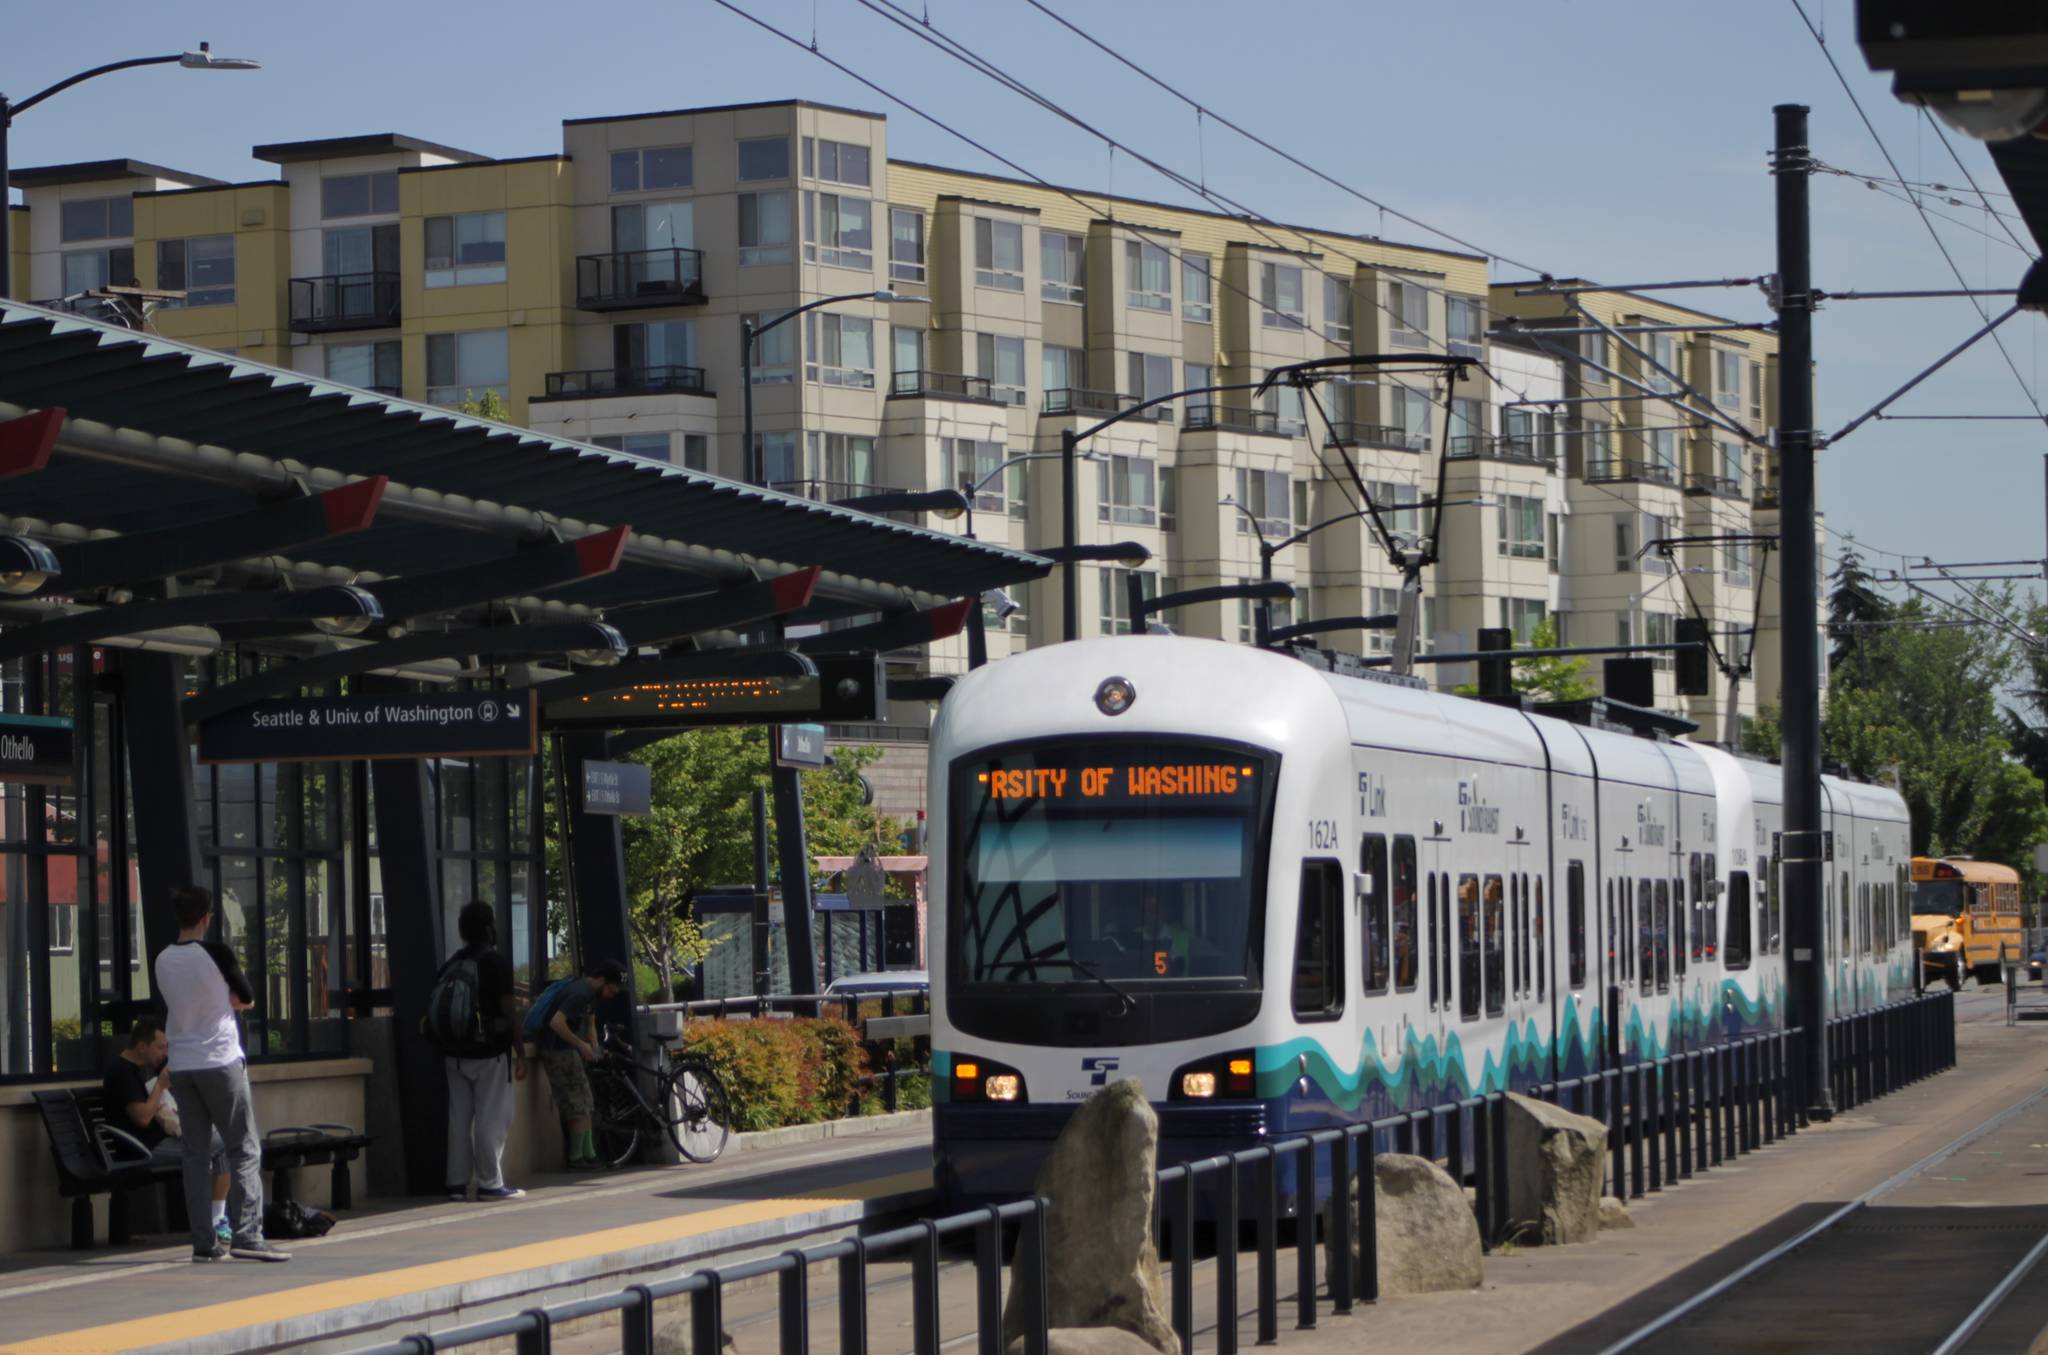 Transit-oriented development near the Othello Station in Southeast Seattle. Photo by SounderBruce/Wikipedia Commons